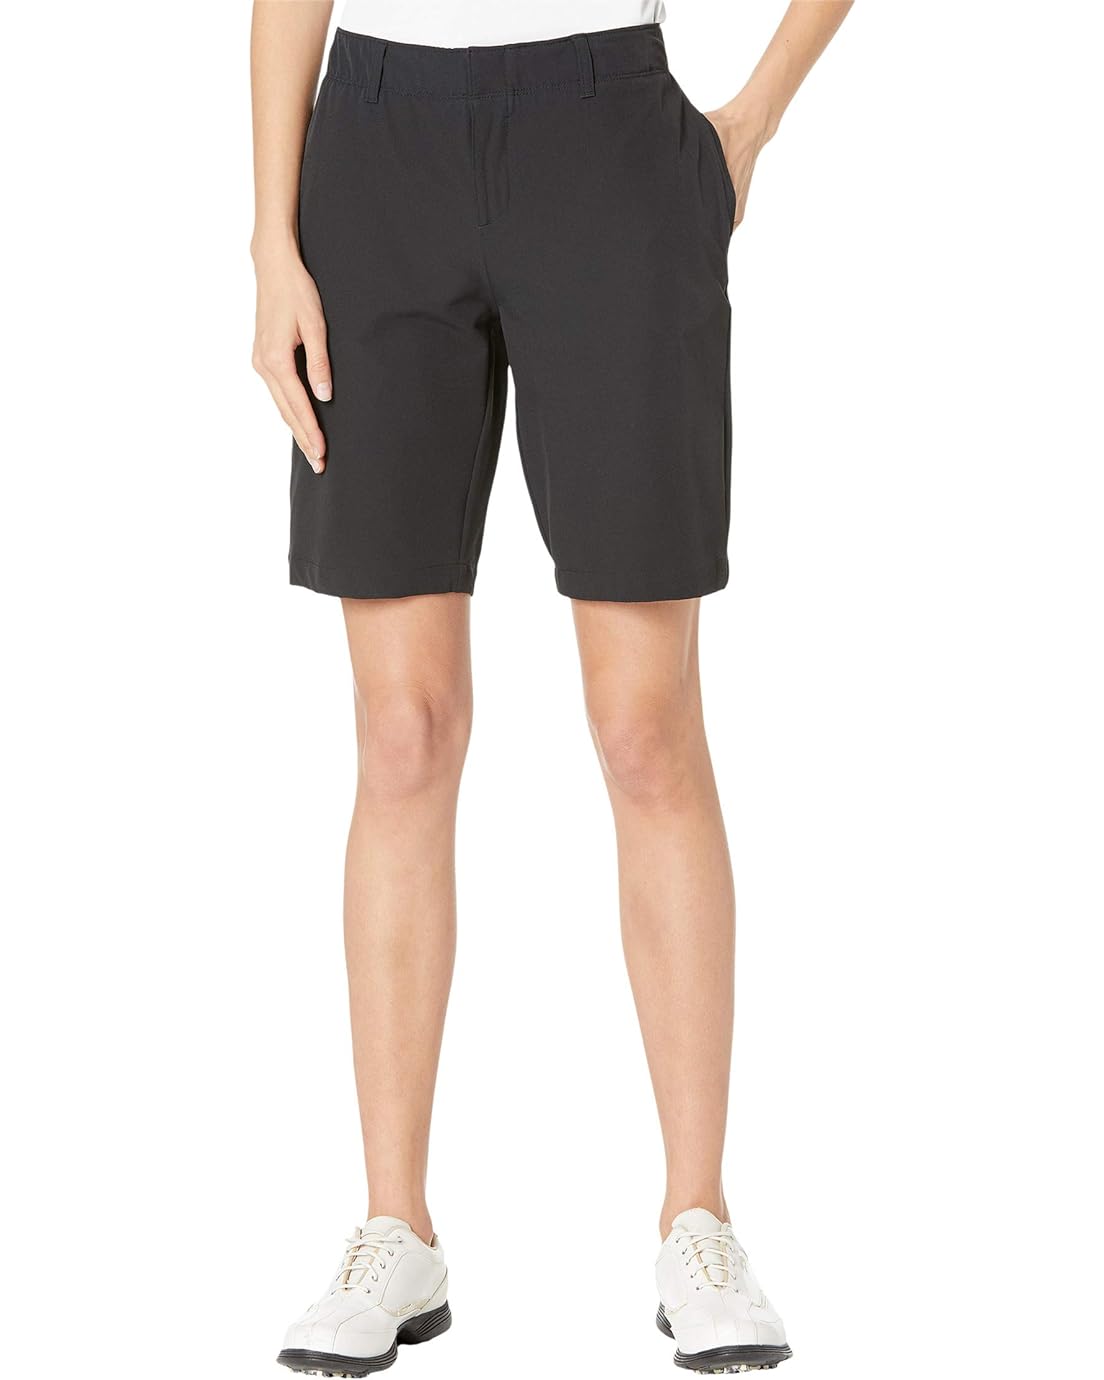 Under Armour Links Shorts